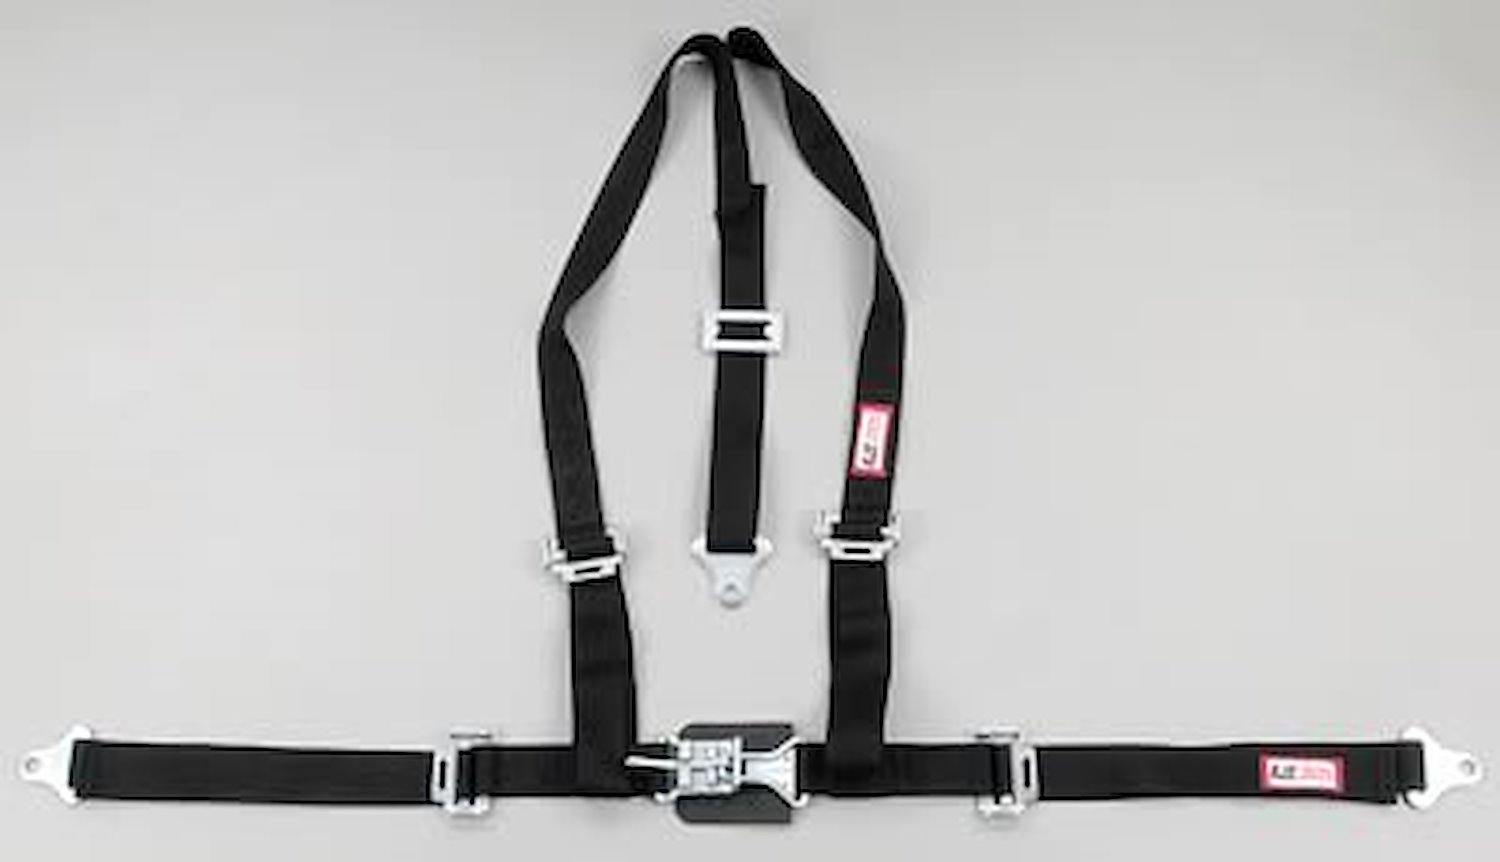 NON-SFI L&L HARNESS 2 PULL UP Lap Belt SNAP SEWN IN 2 S.H. Y FLOOR Mount w/STERNUM STRAP WRAP/SNAP RED